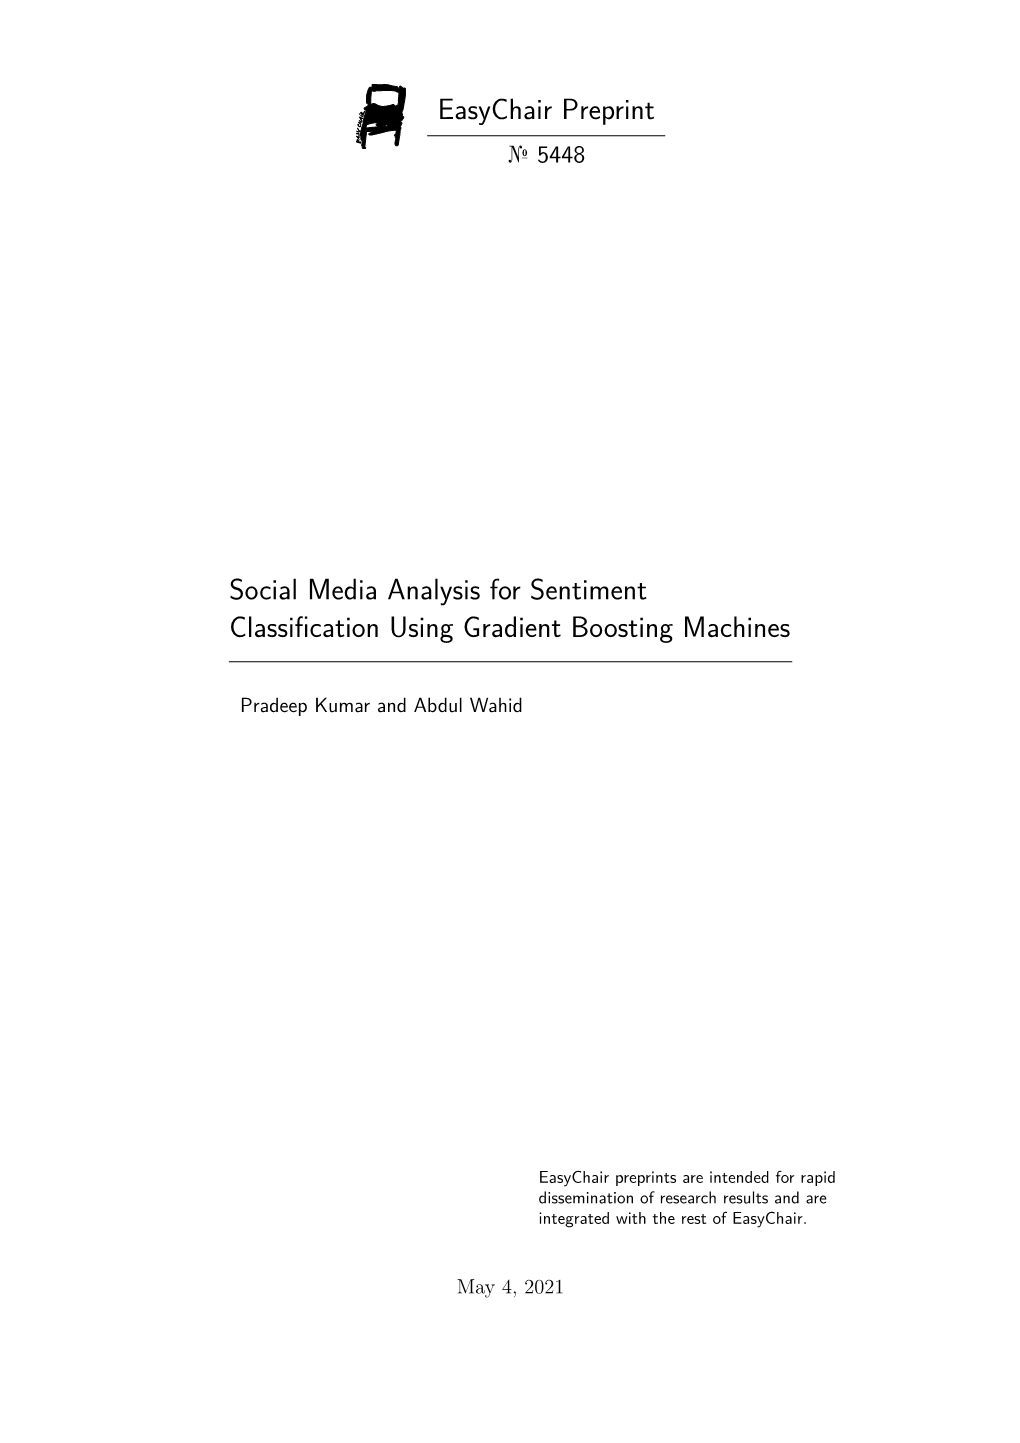 Social Media Analysis for Sentiment Classification Using Gradient Boosting Machines